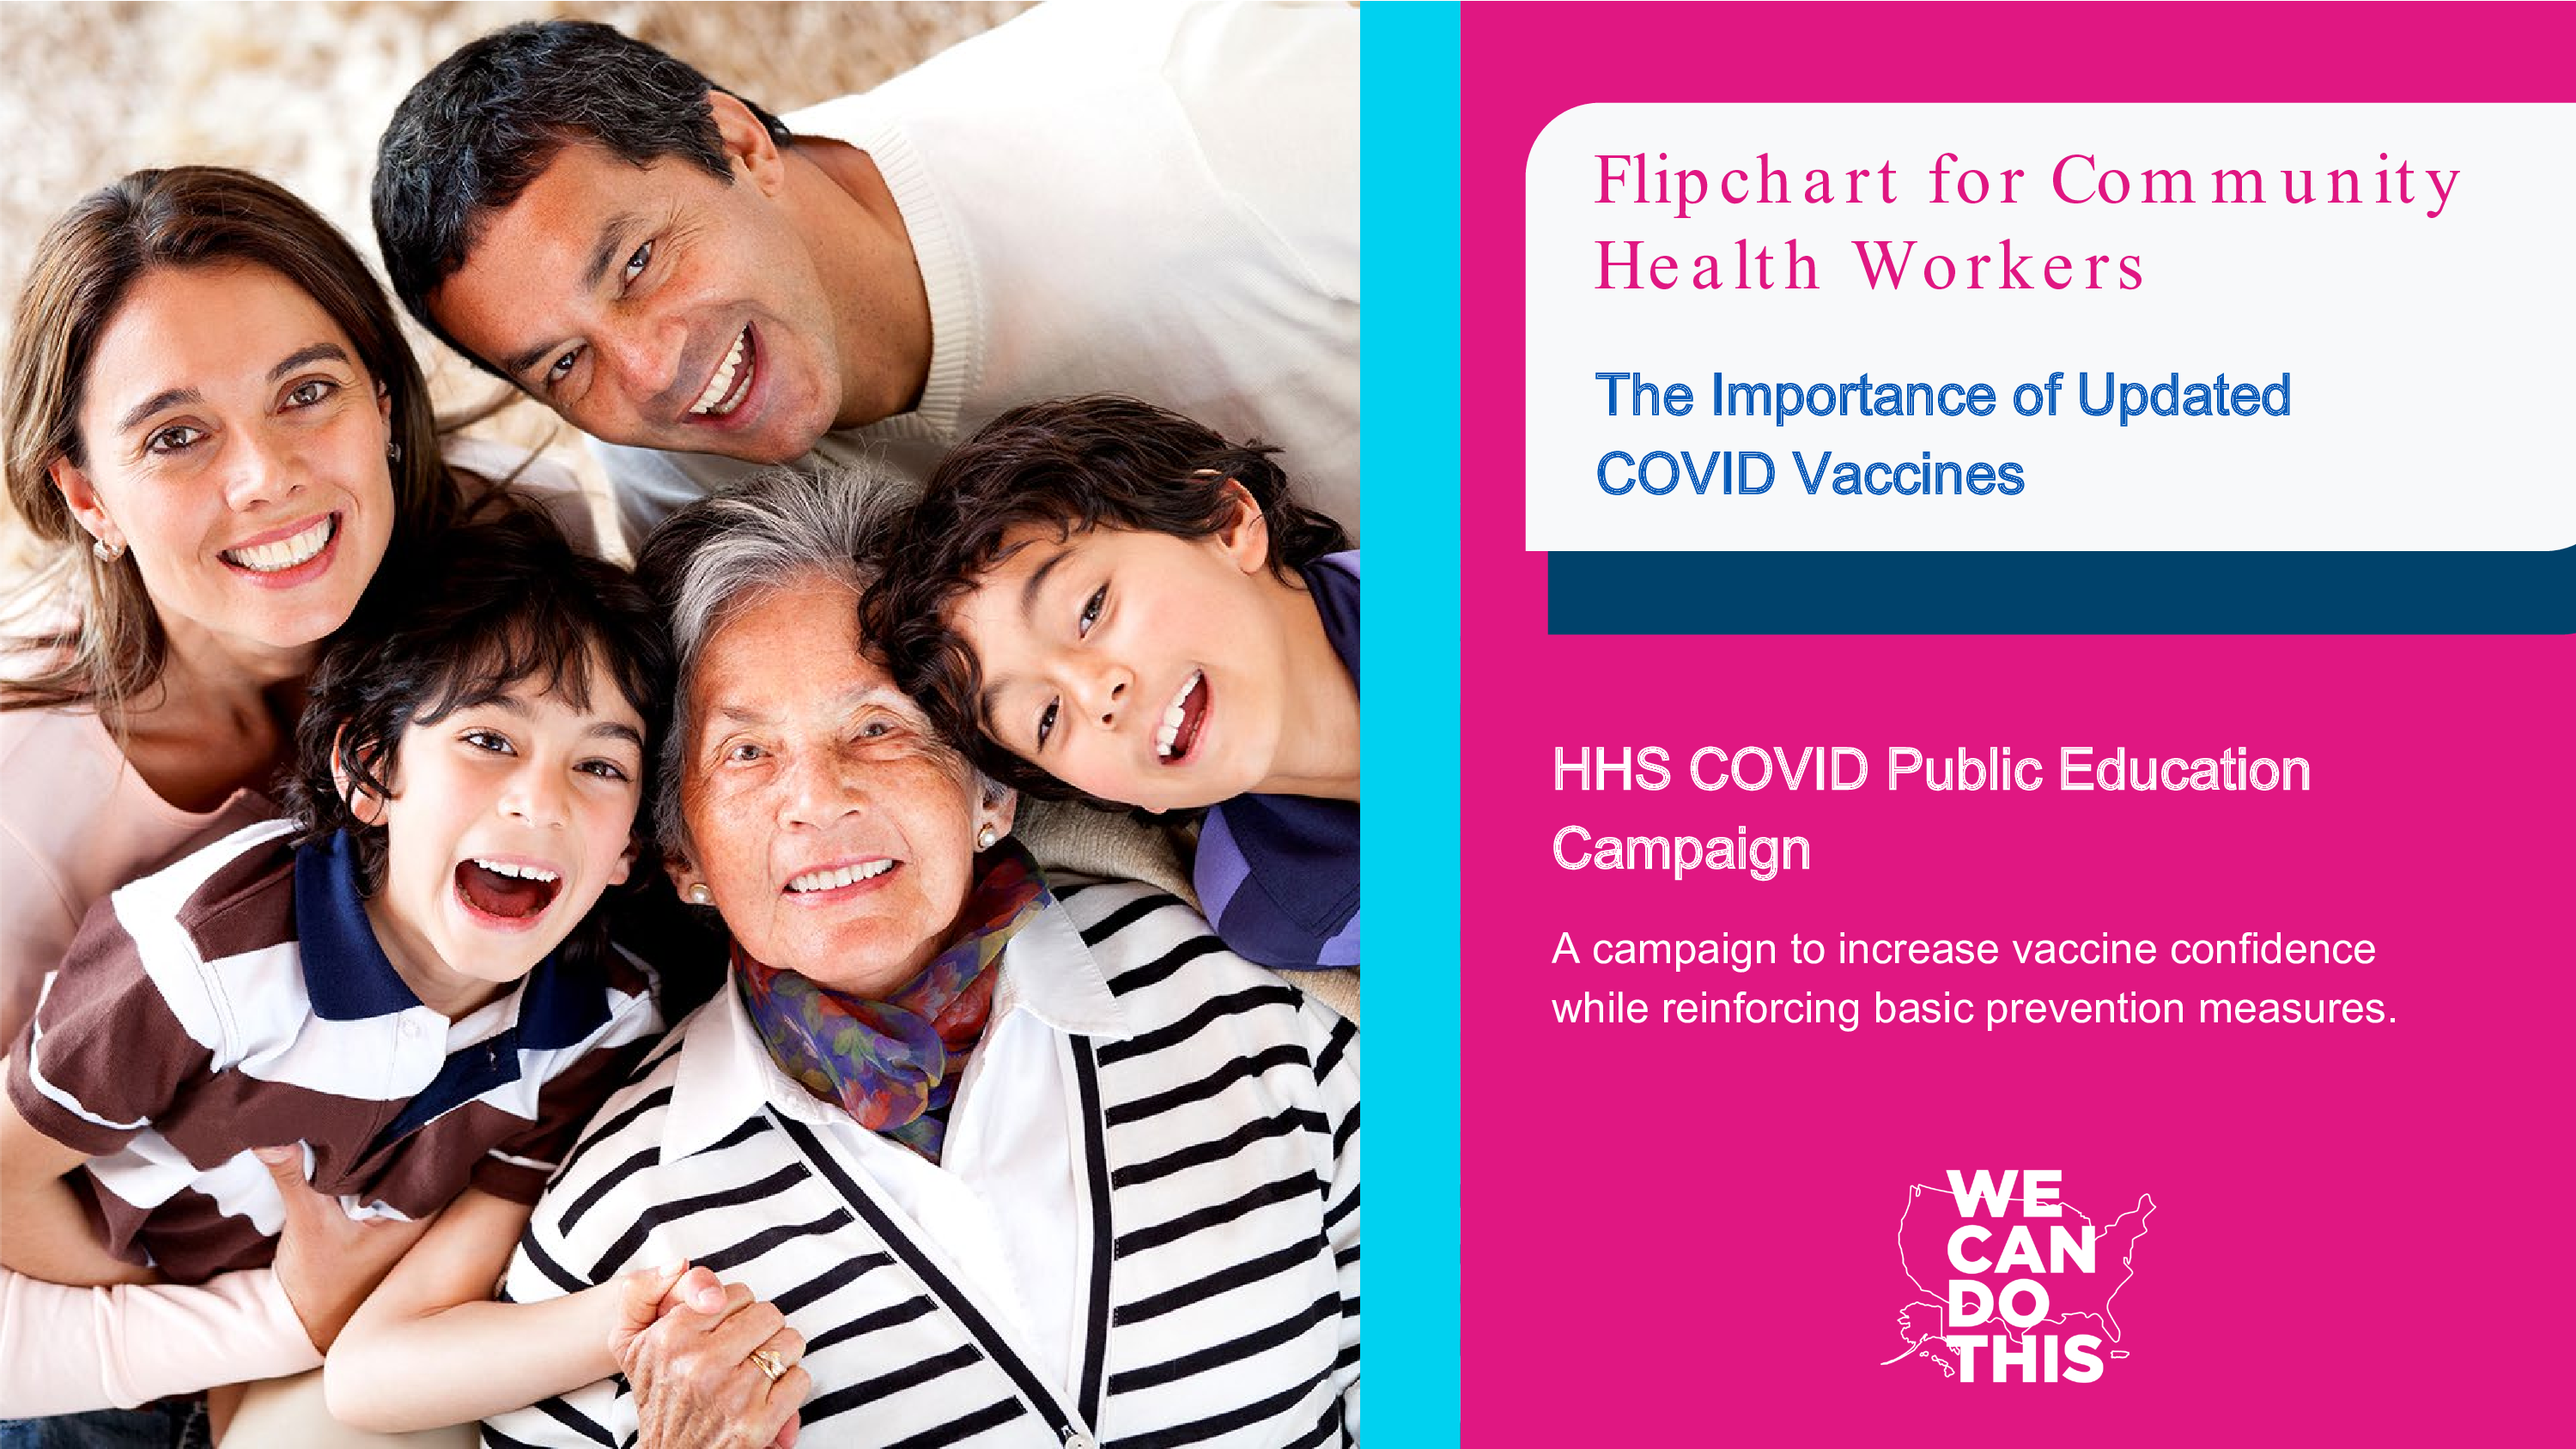 Front cover of the resource with pink, blue and white color scheme on the right and We Can Do This campaign logo. An image of a smiling and happy multigenerational family is on the left hand side.